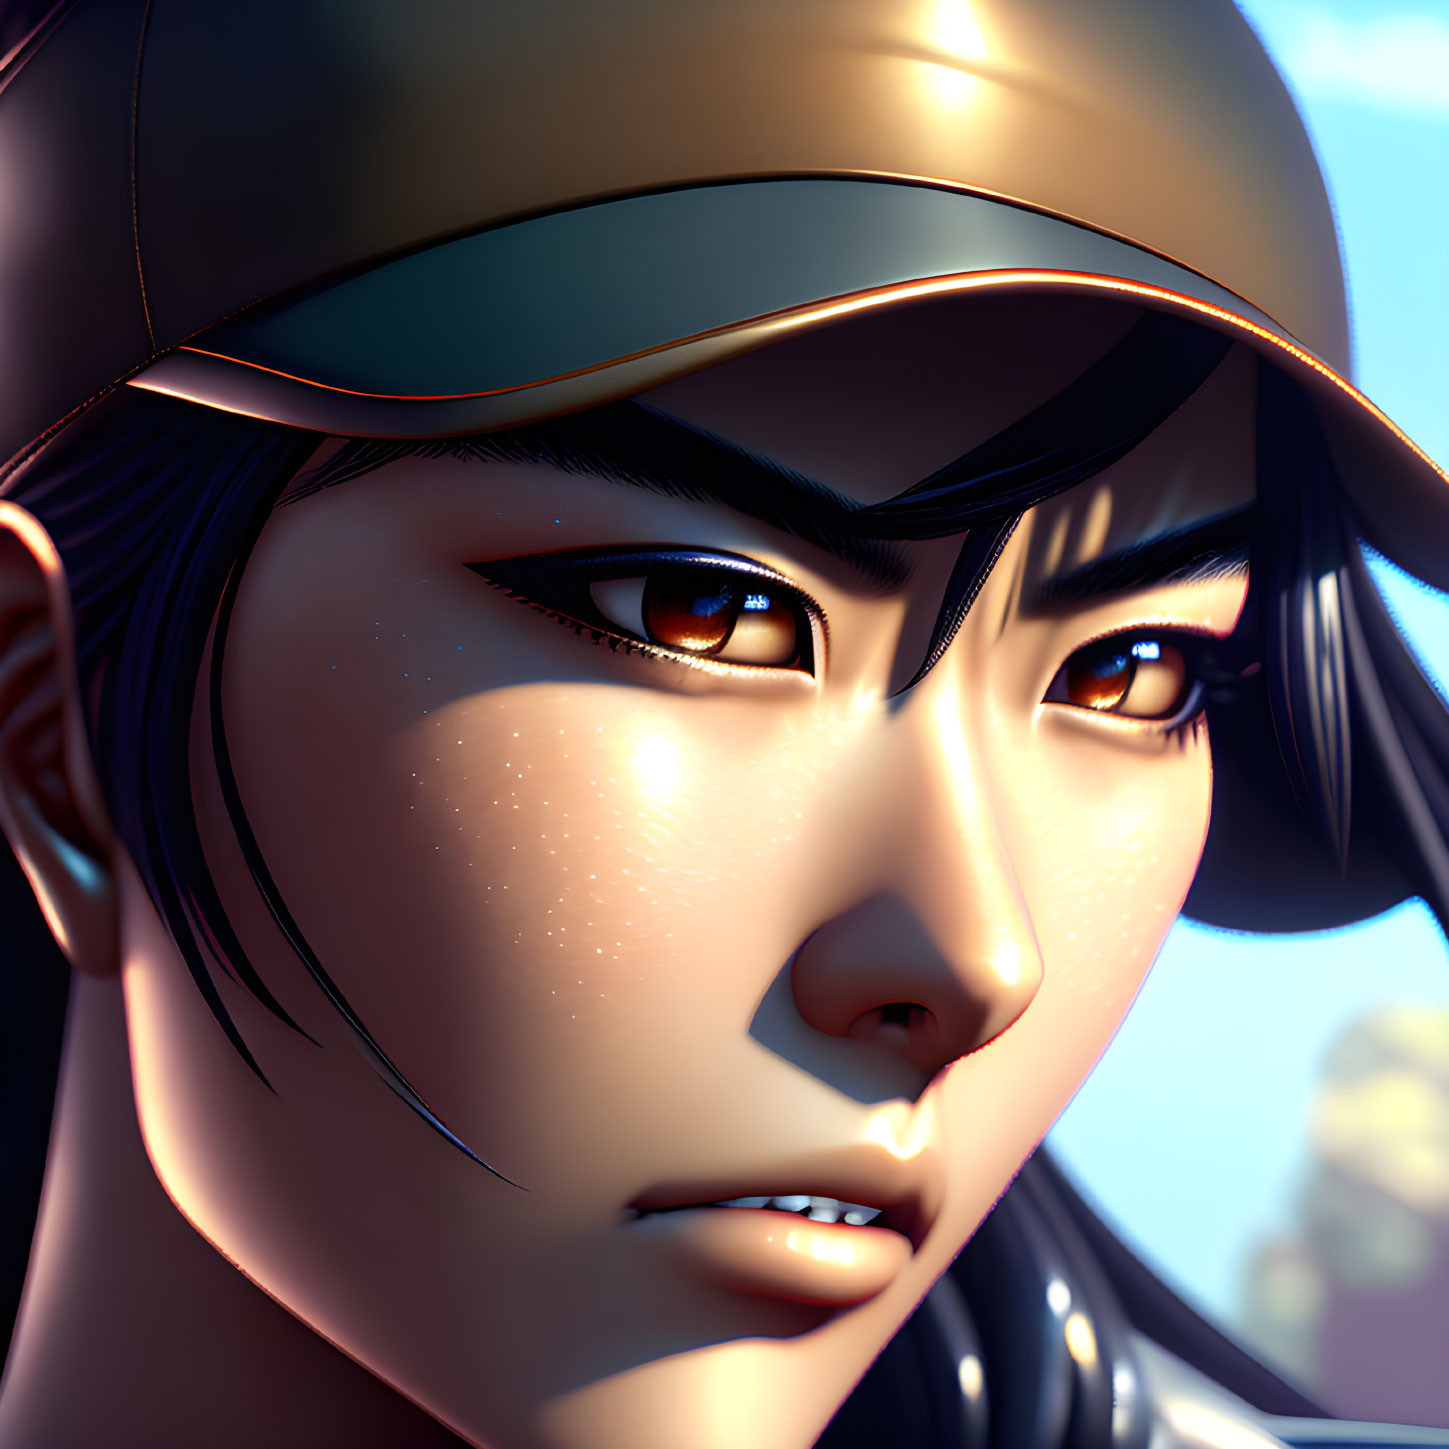 Detailed close-up of determined female character with cap, expressive eyes, and subtle freckles under soft